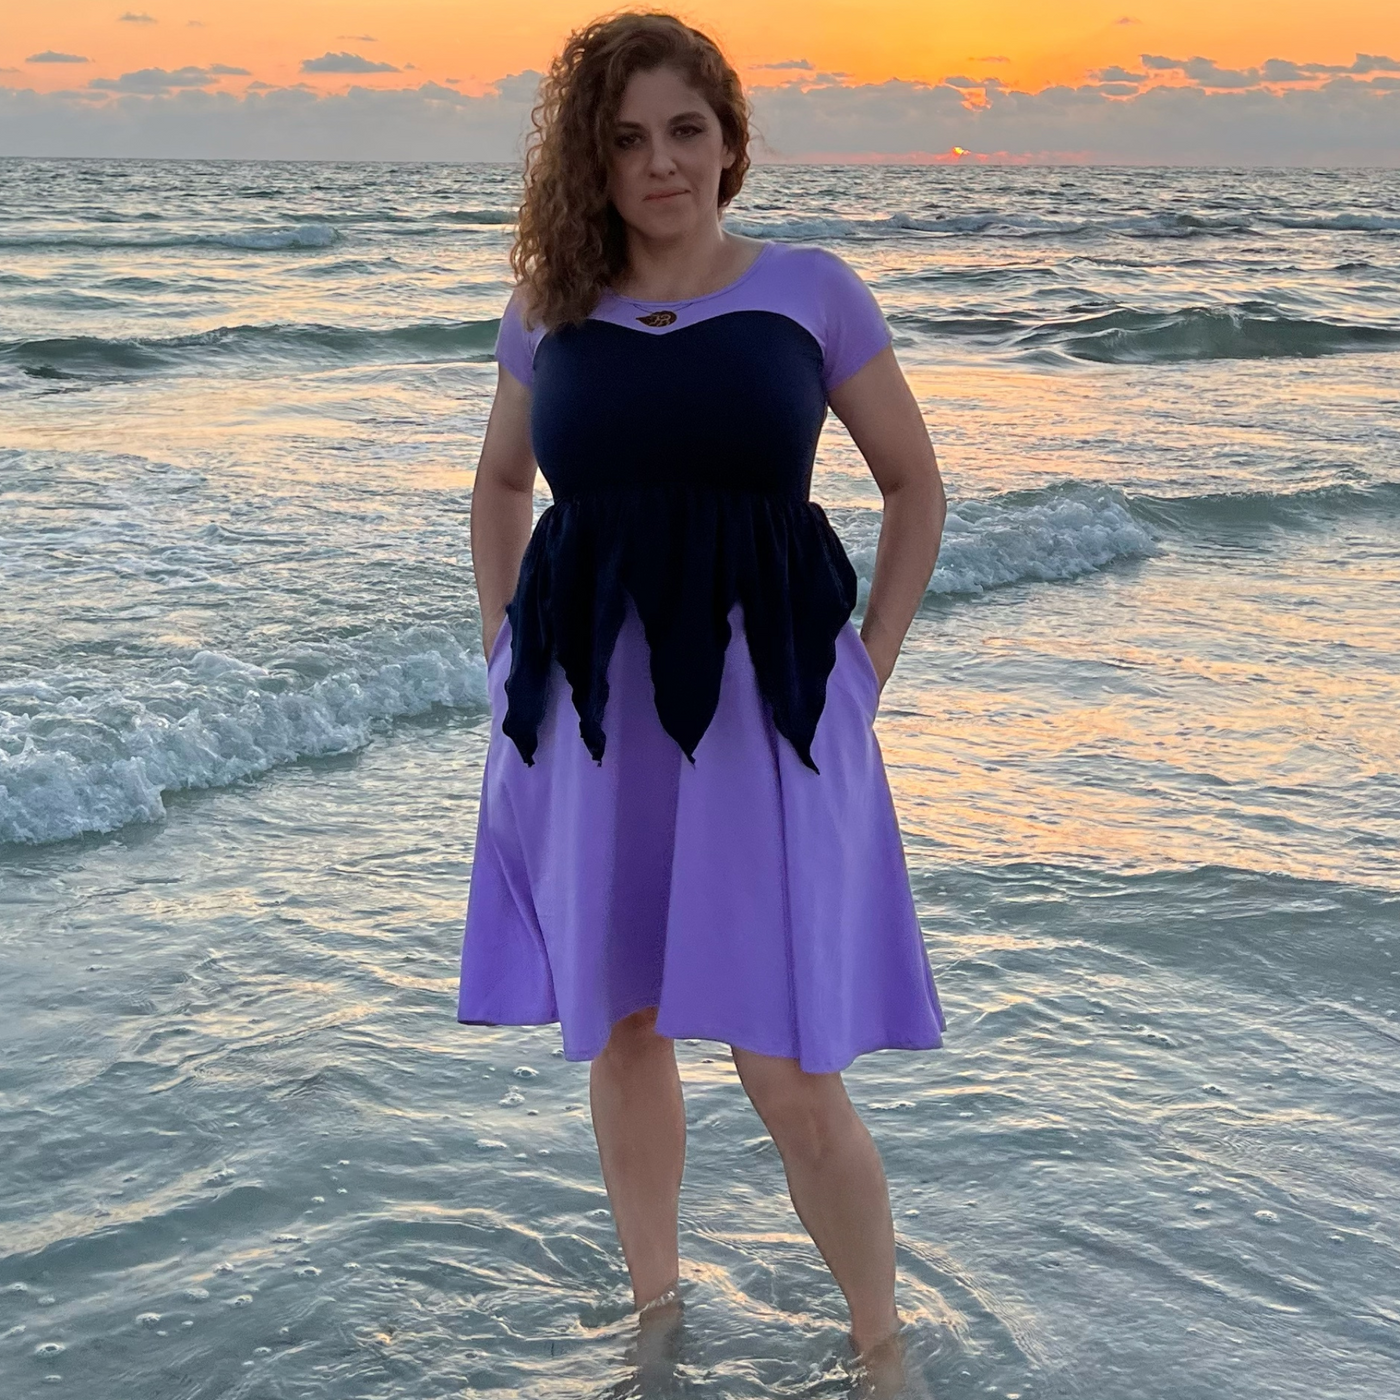 The Sea Witch dress